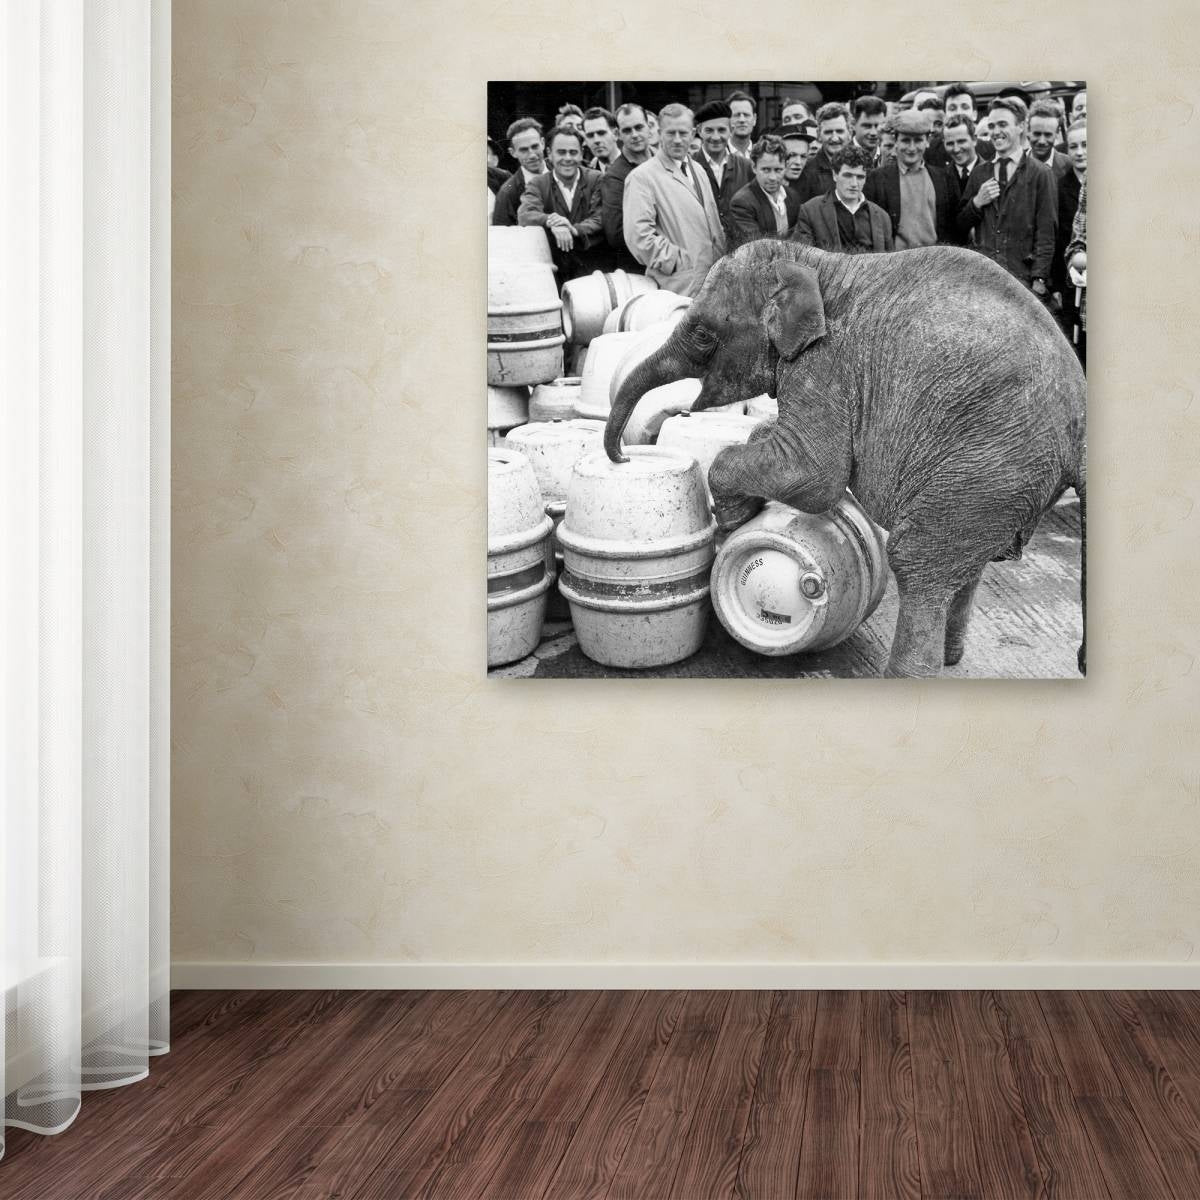 An iconic Guinness logo, a black and white photo of an elephant in a room, transformed into captivating Guinness Brewery 'Guinness XIX' Canvas Art.